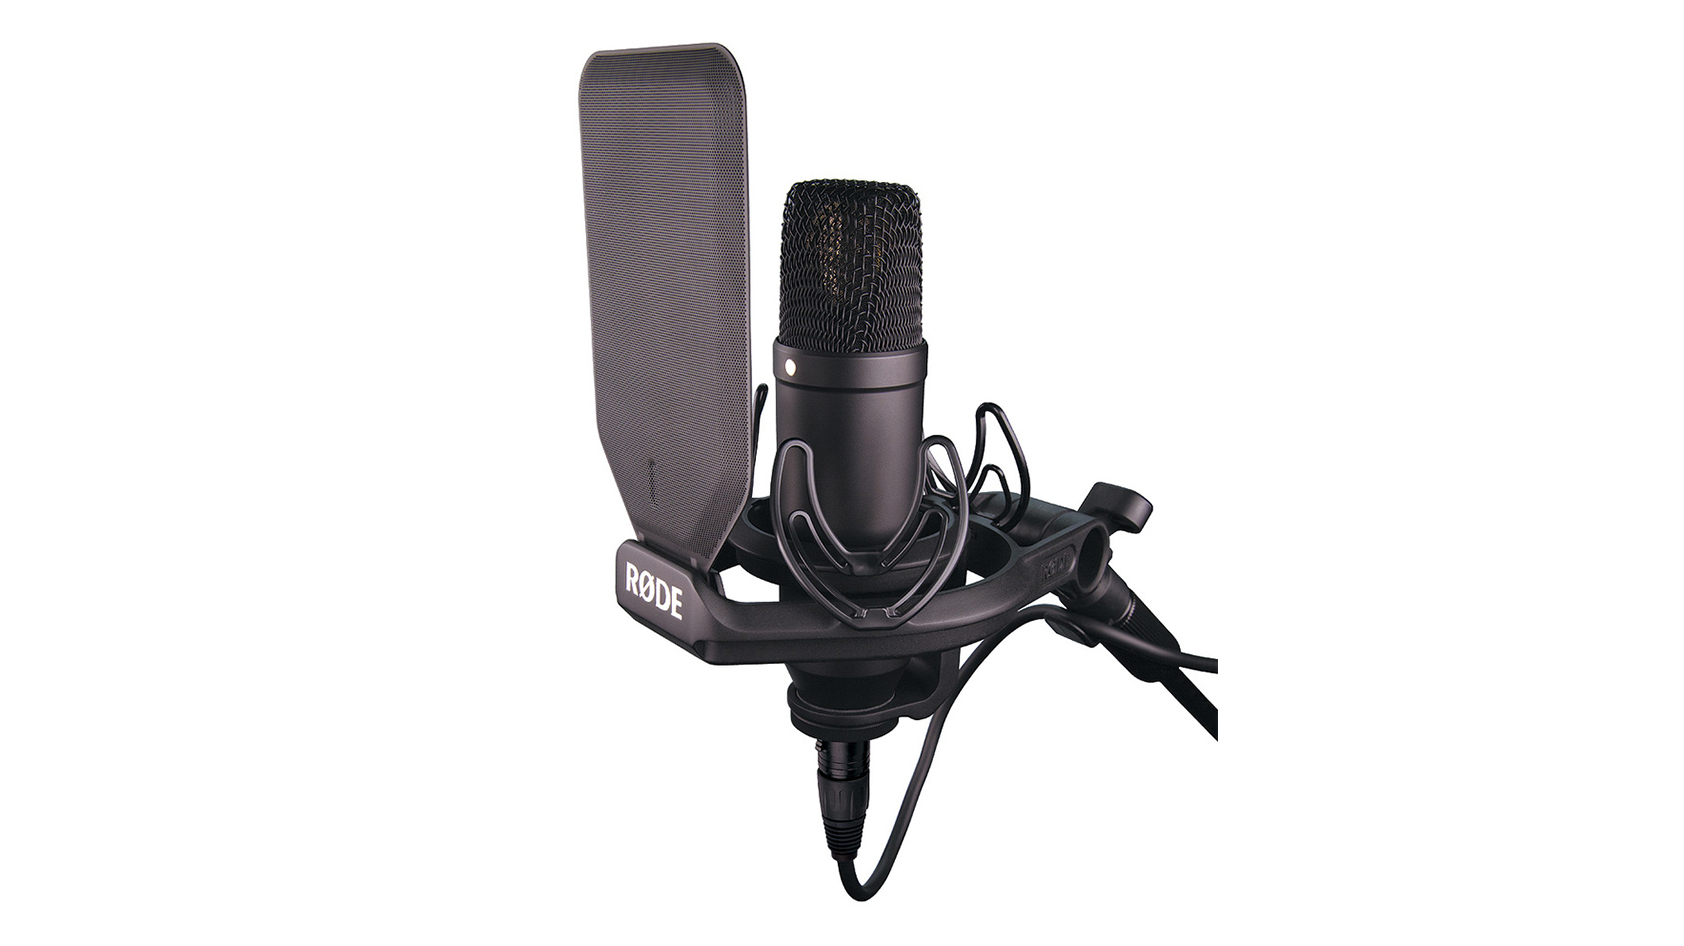 A product image of the Rode NT1 with shock mount and pop filter